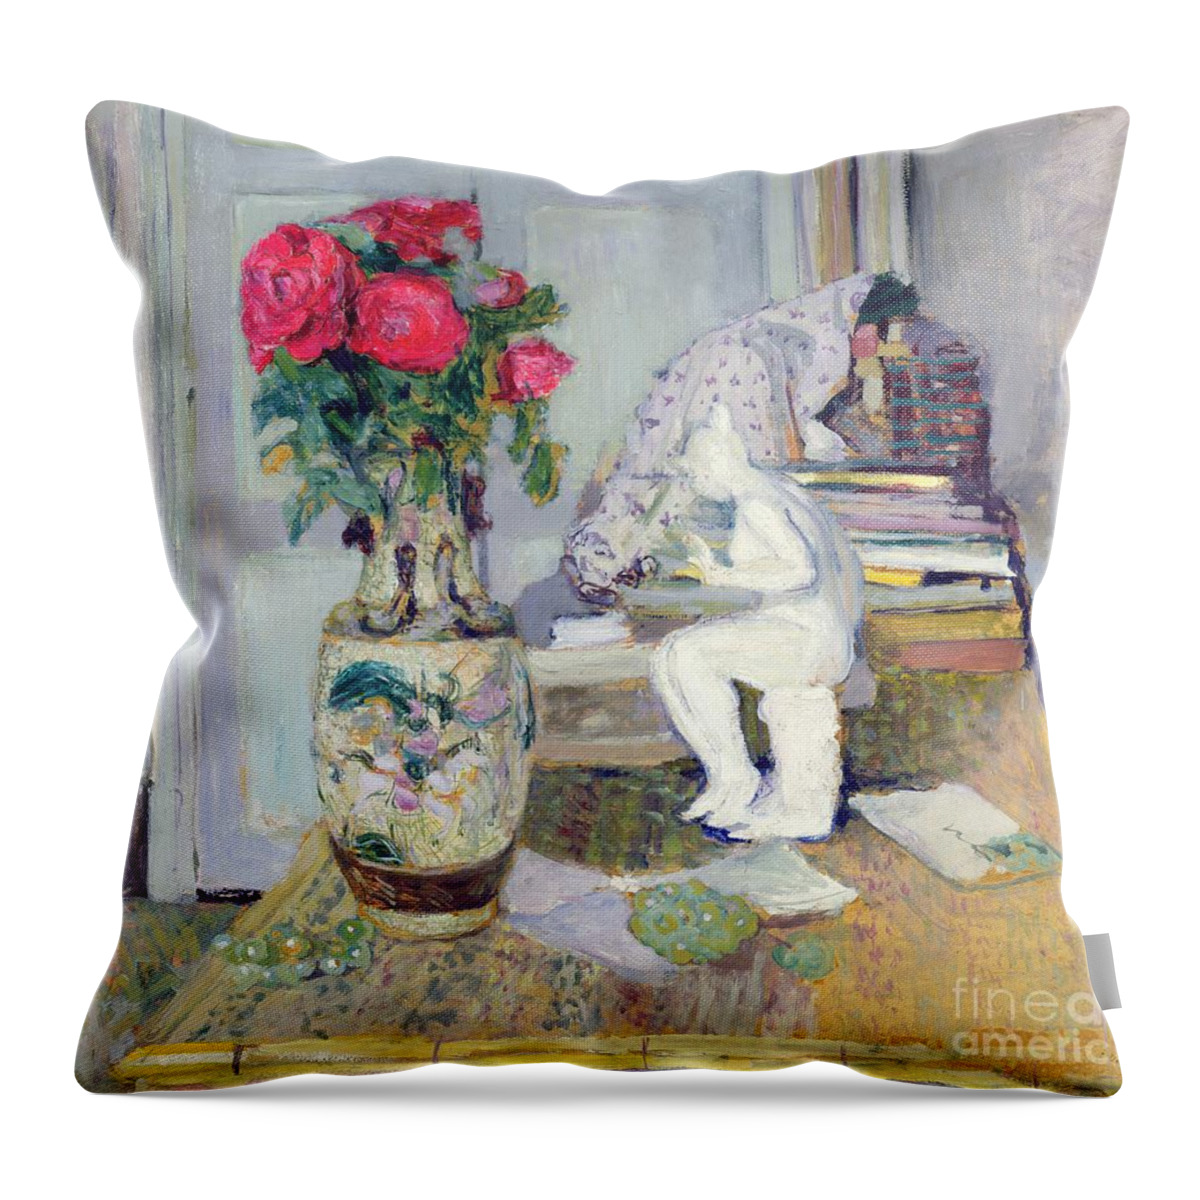 Statuette Throw Pillow featuring the painting Statuette by Maillol and Red Roses by Edouard Vuillard